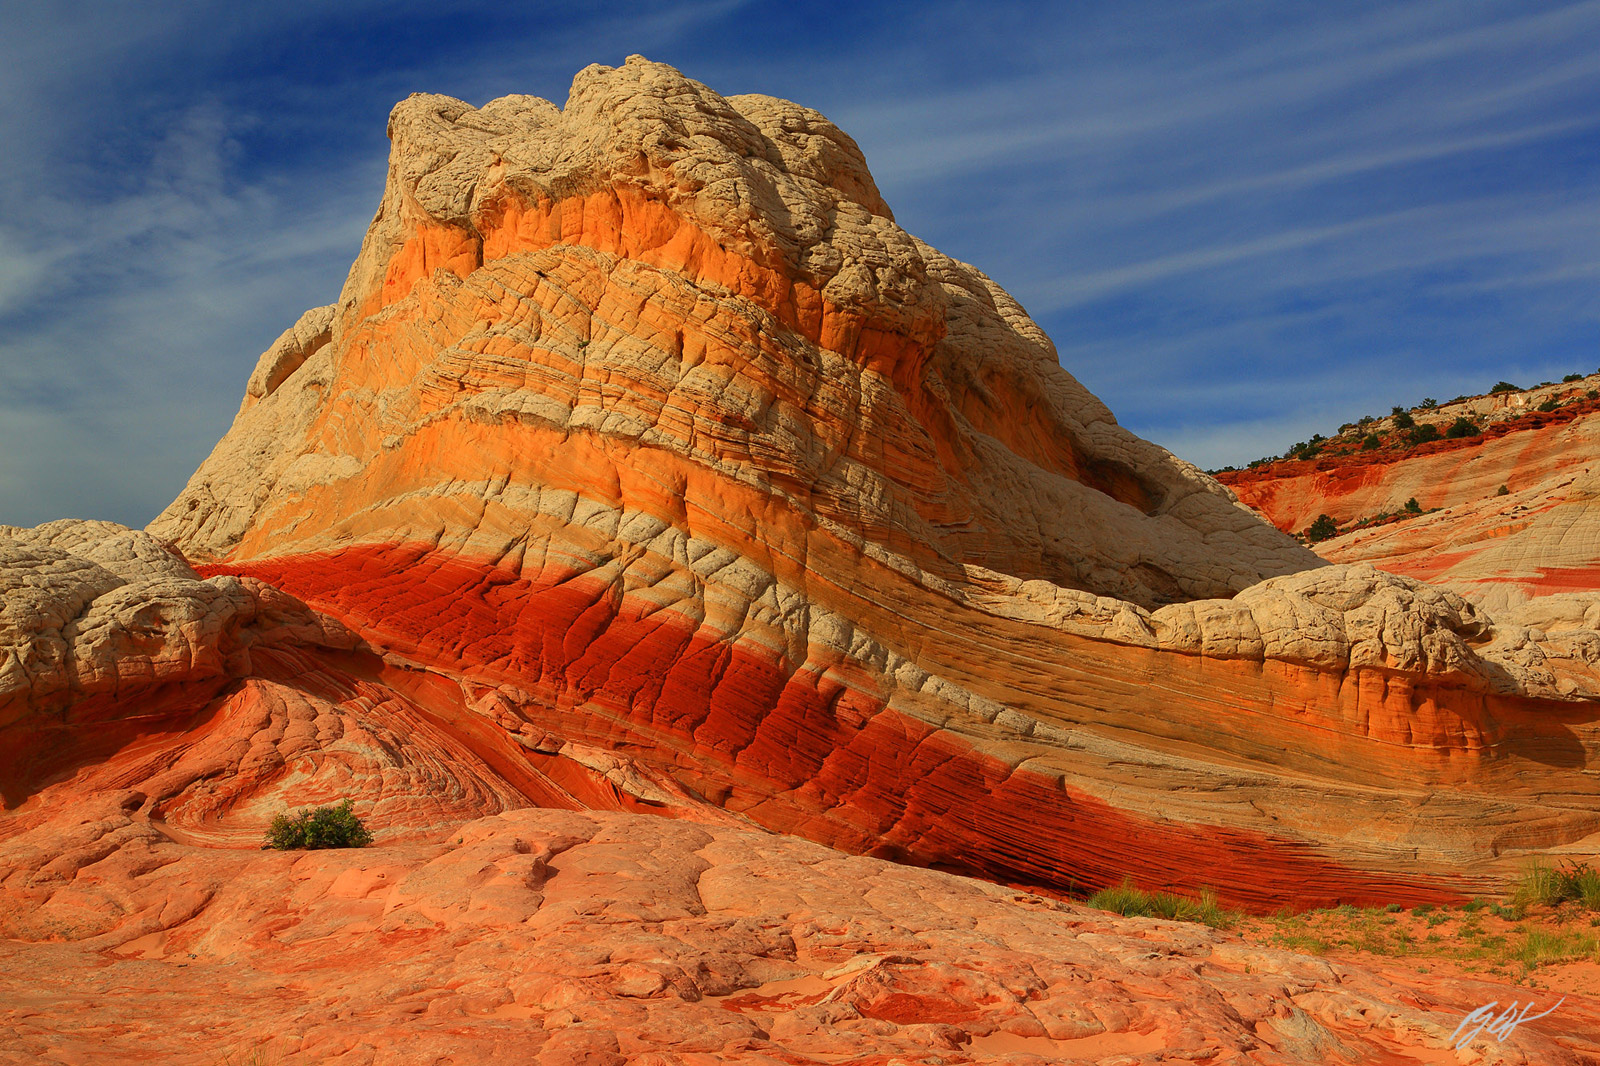 Morning Light on the White Pocket Formations in the Vermillion Cliffs Wilderness in Arizona